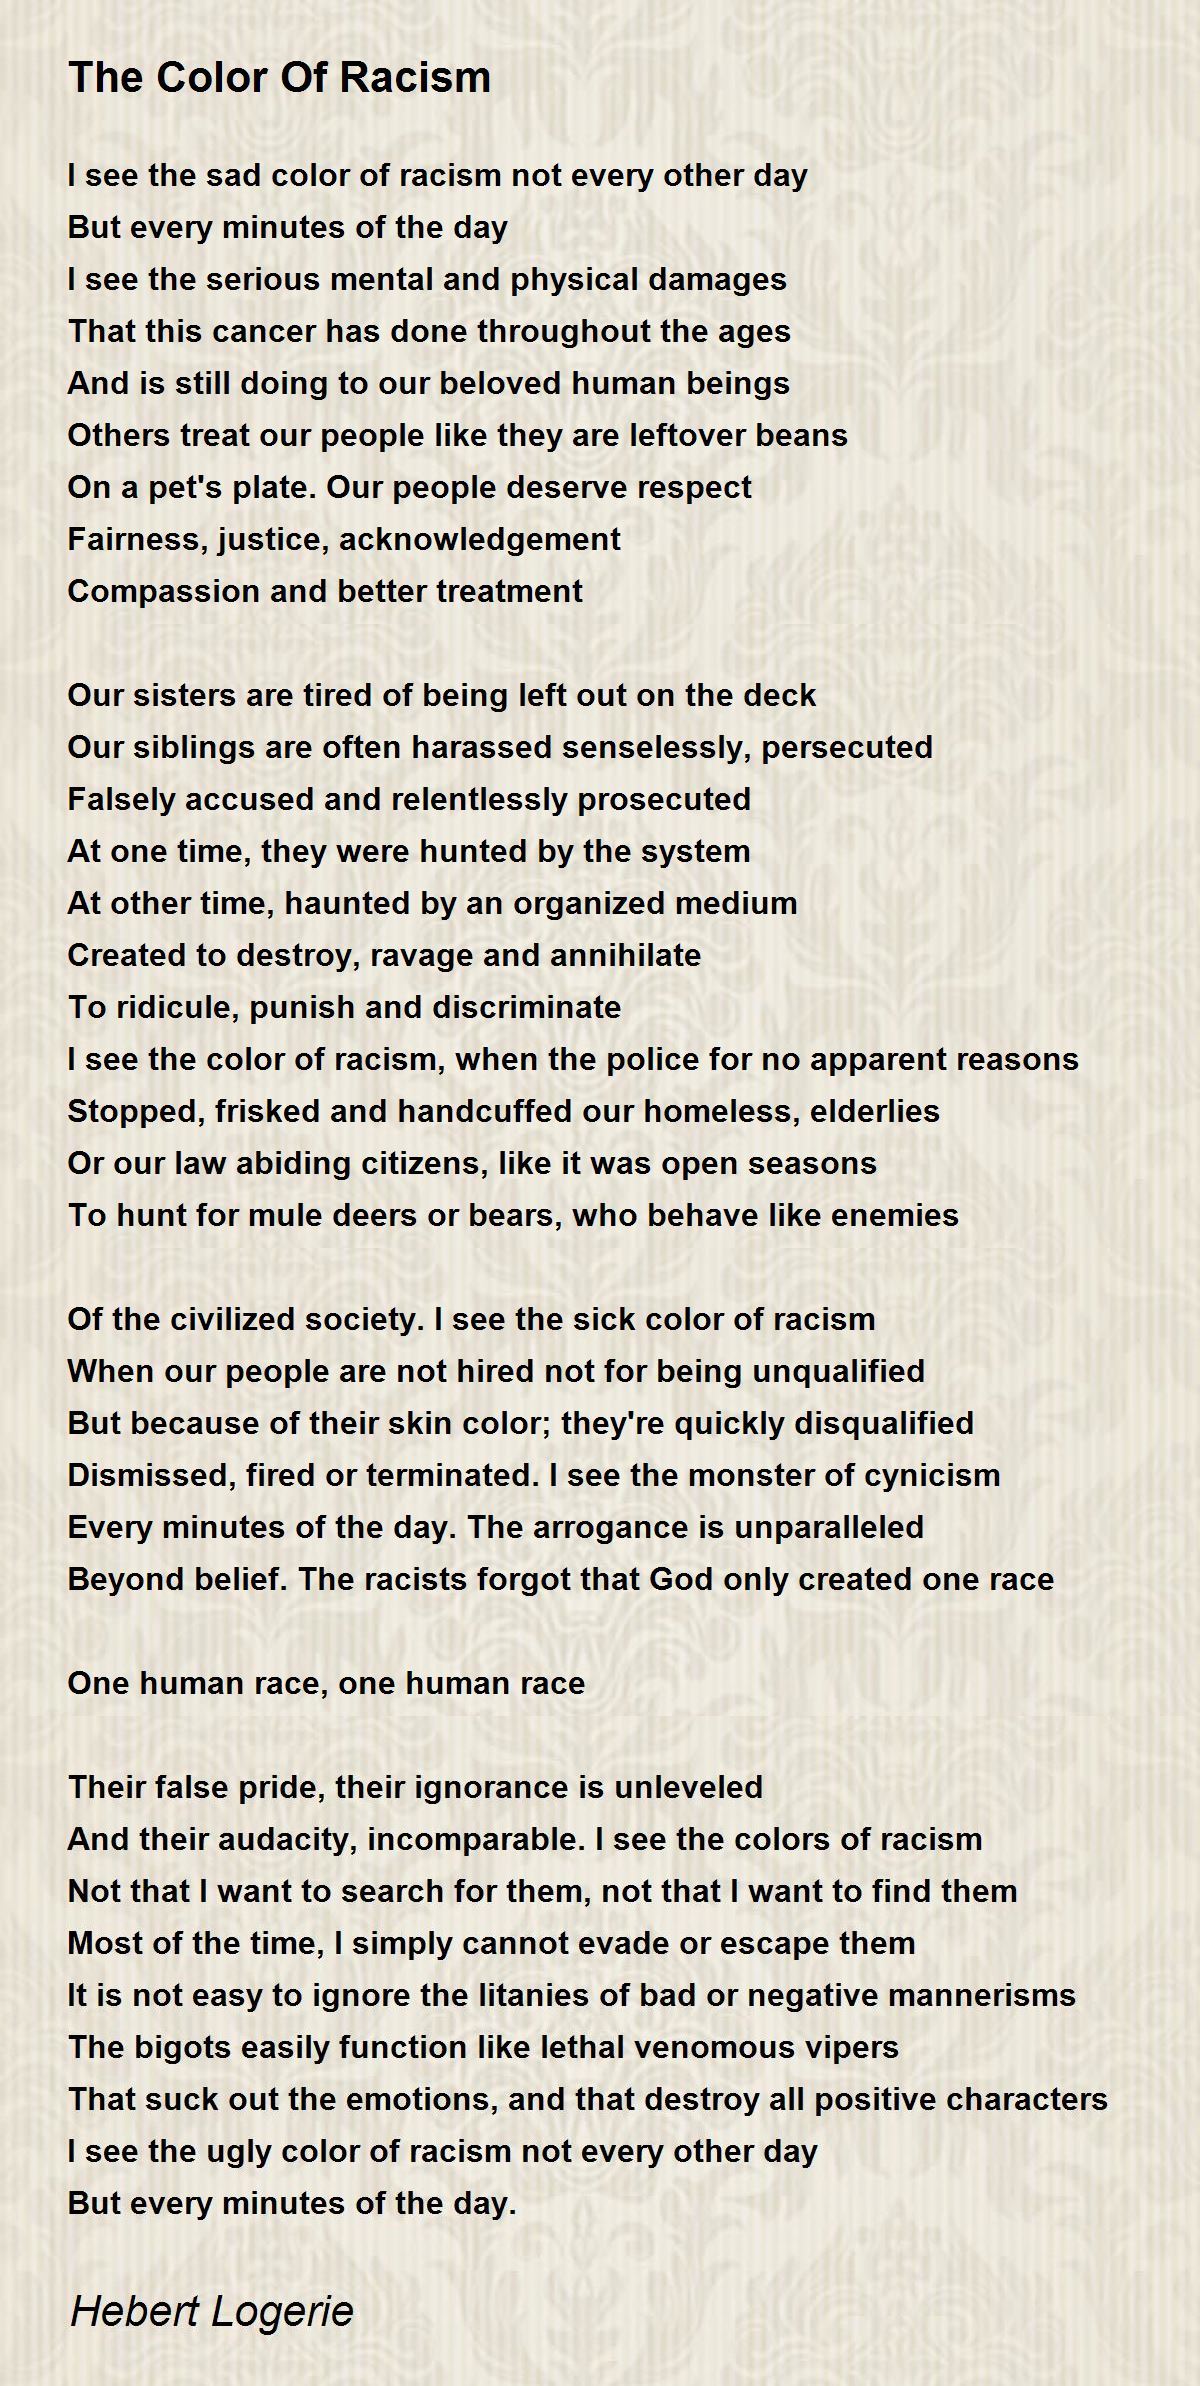 Racism To The Poem: To This Day